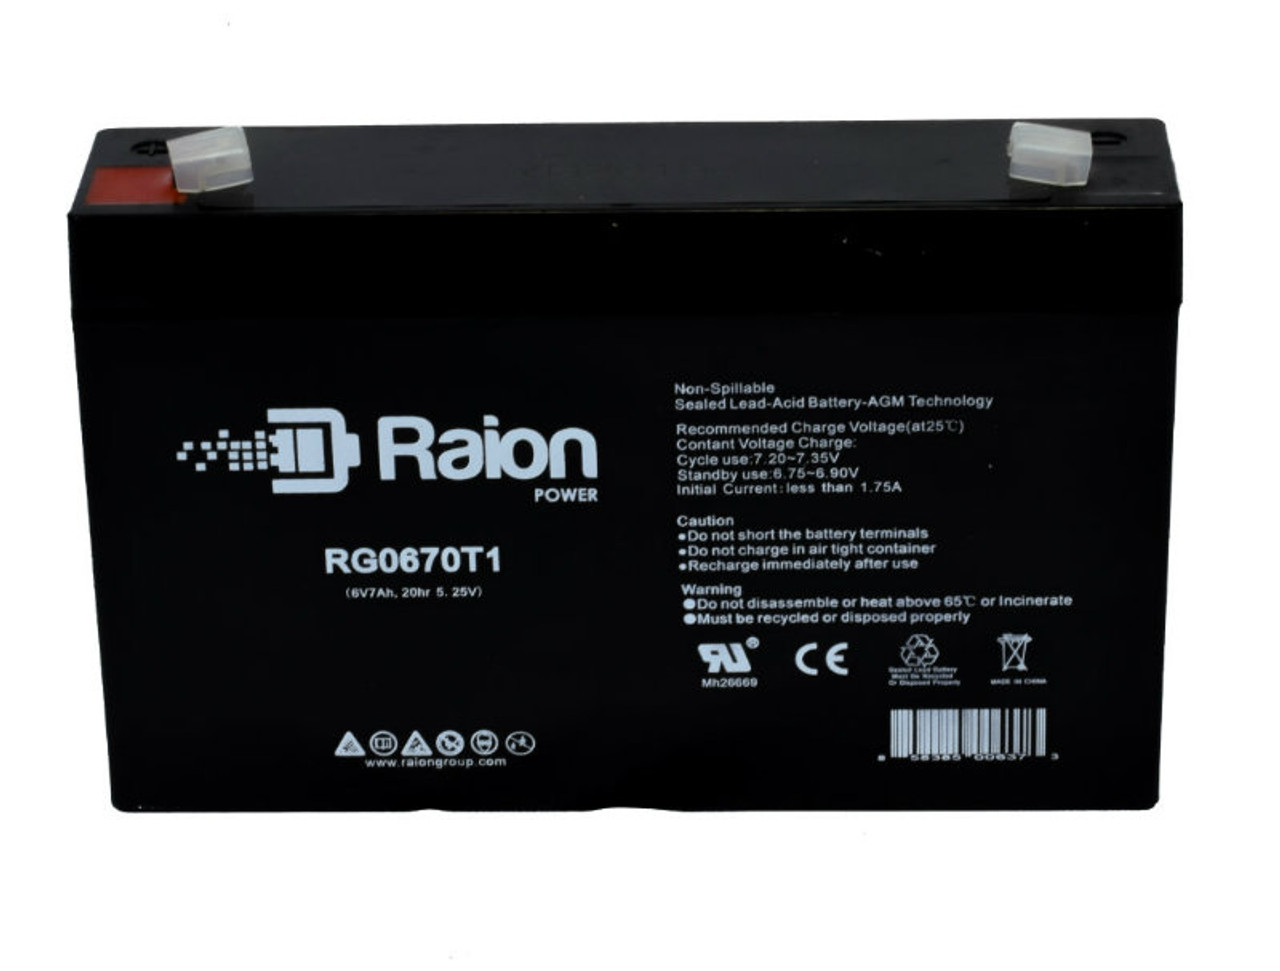 Raion Power RG0670T1 Replacement Battery Cartridge for Corometrics Medical Systems 511 Monitor